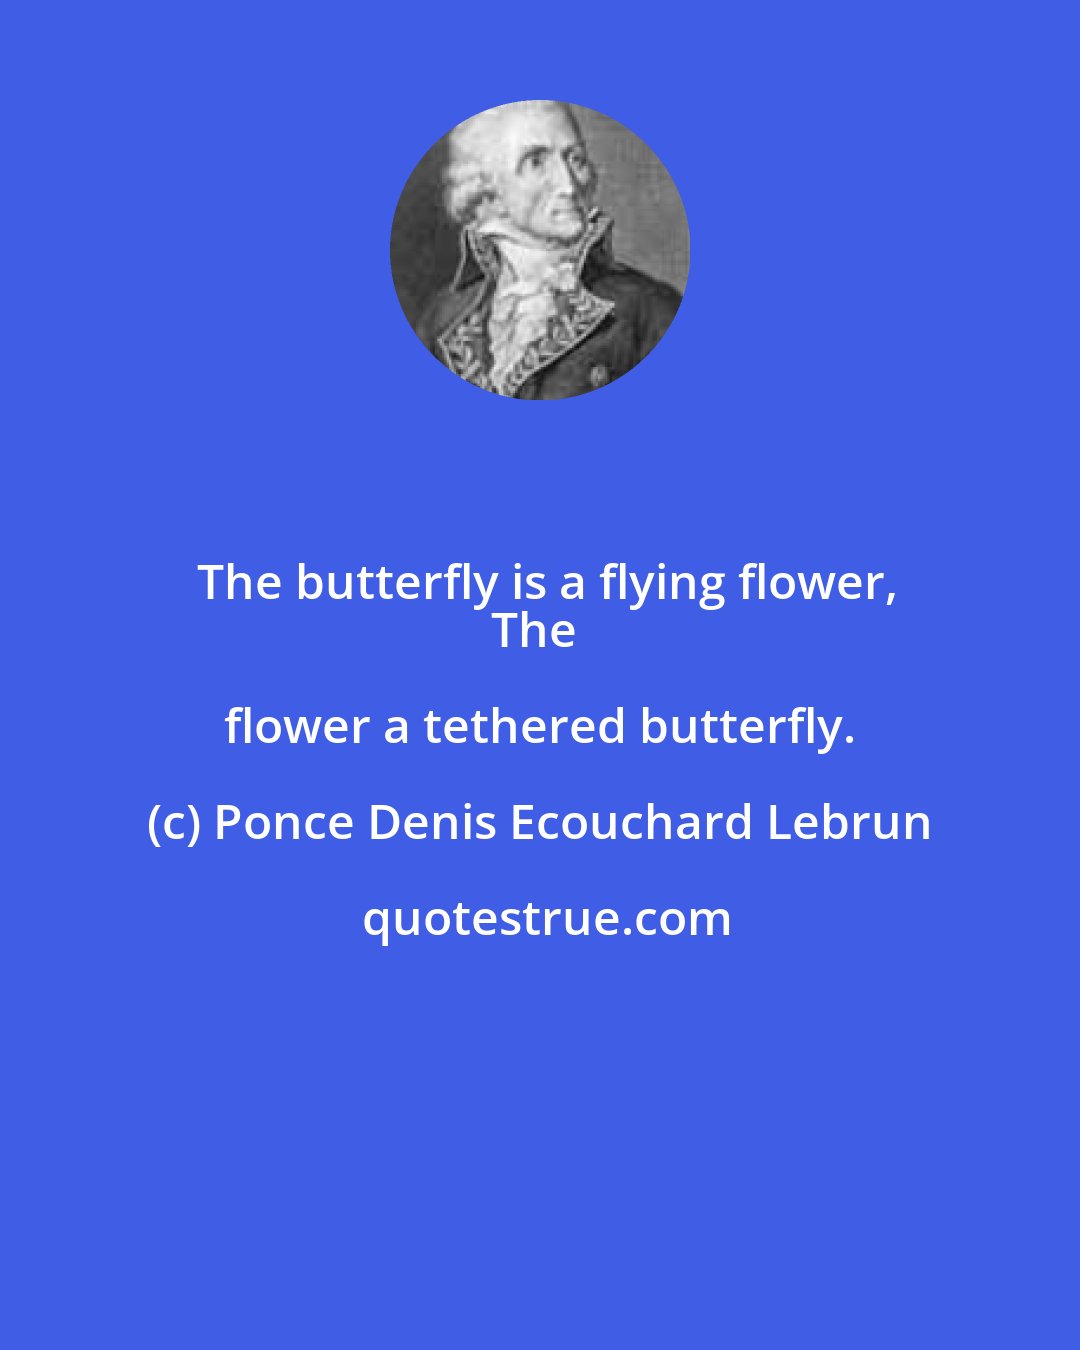 Ponce Denis Ecouchard Lebrun: The butterfly is a flying flower,
The flower a tethered butterfly.